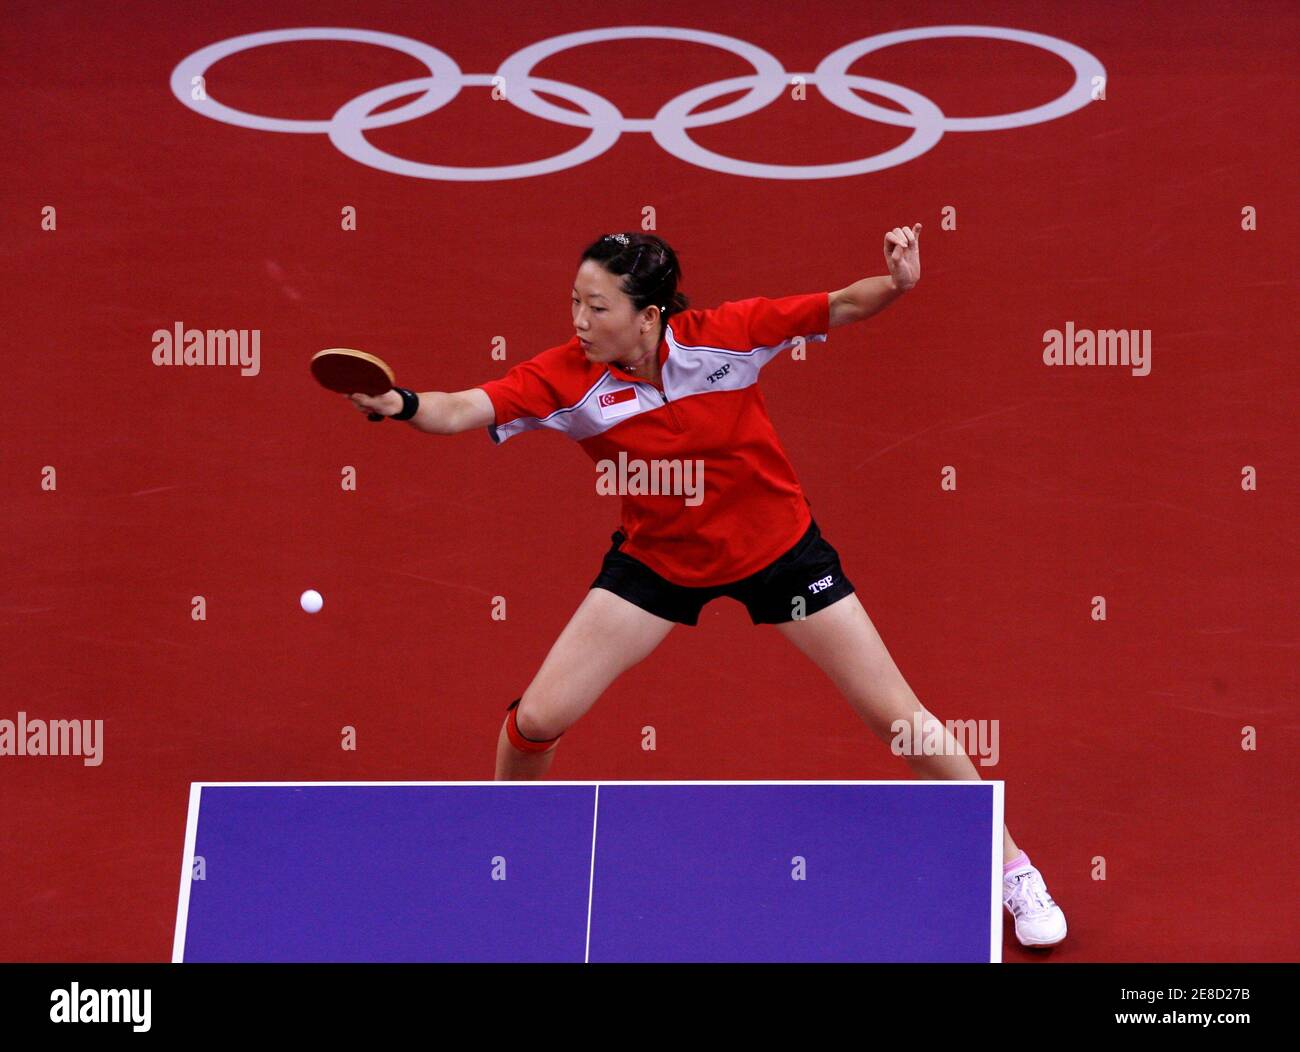 Li Jia Wei of Singapore plays a shot during her women's singles quarterfinal table tennis match against Wang Chen of the U.S. at the Beijing 2008 Olympic Games August 21, 2008.     REUTERS/Beawiharta (CHINA) Stock Photo